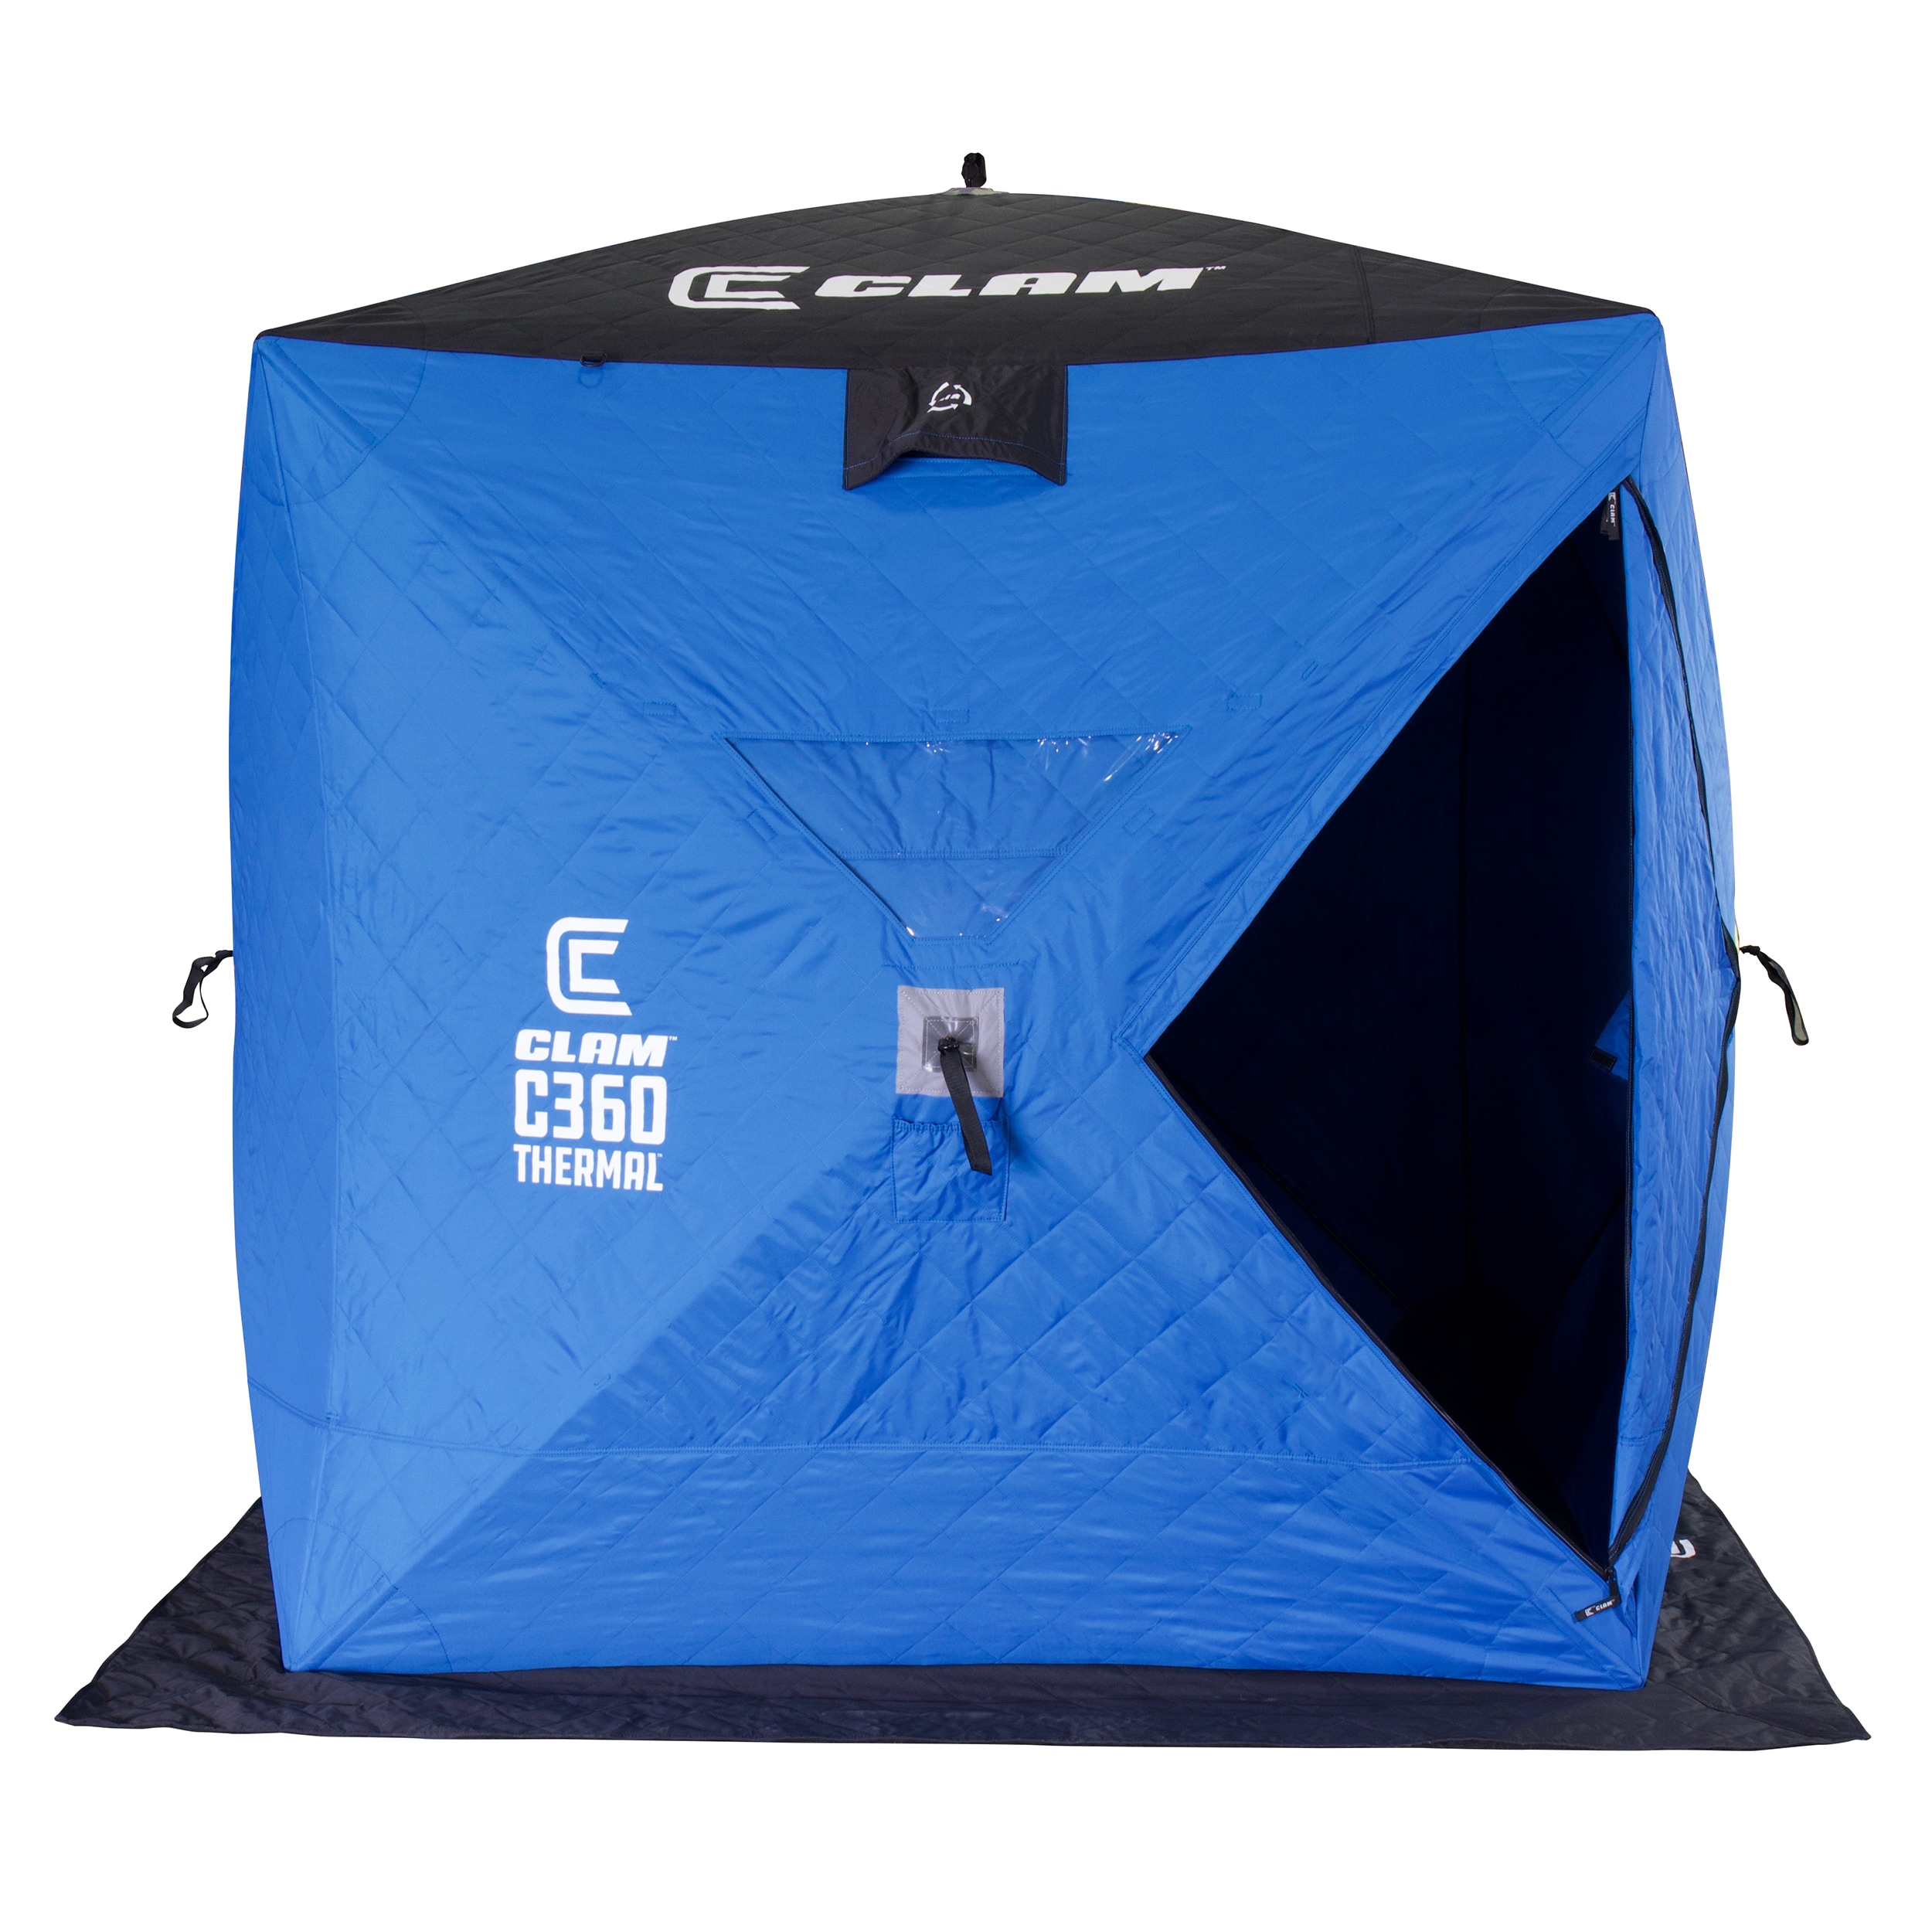 Clam C-360 Thermal Hub Ice Shelter